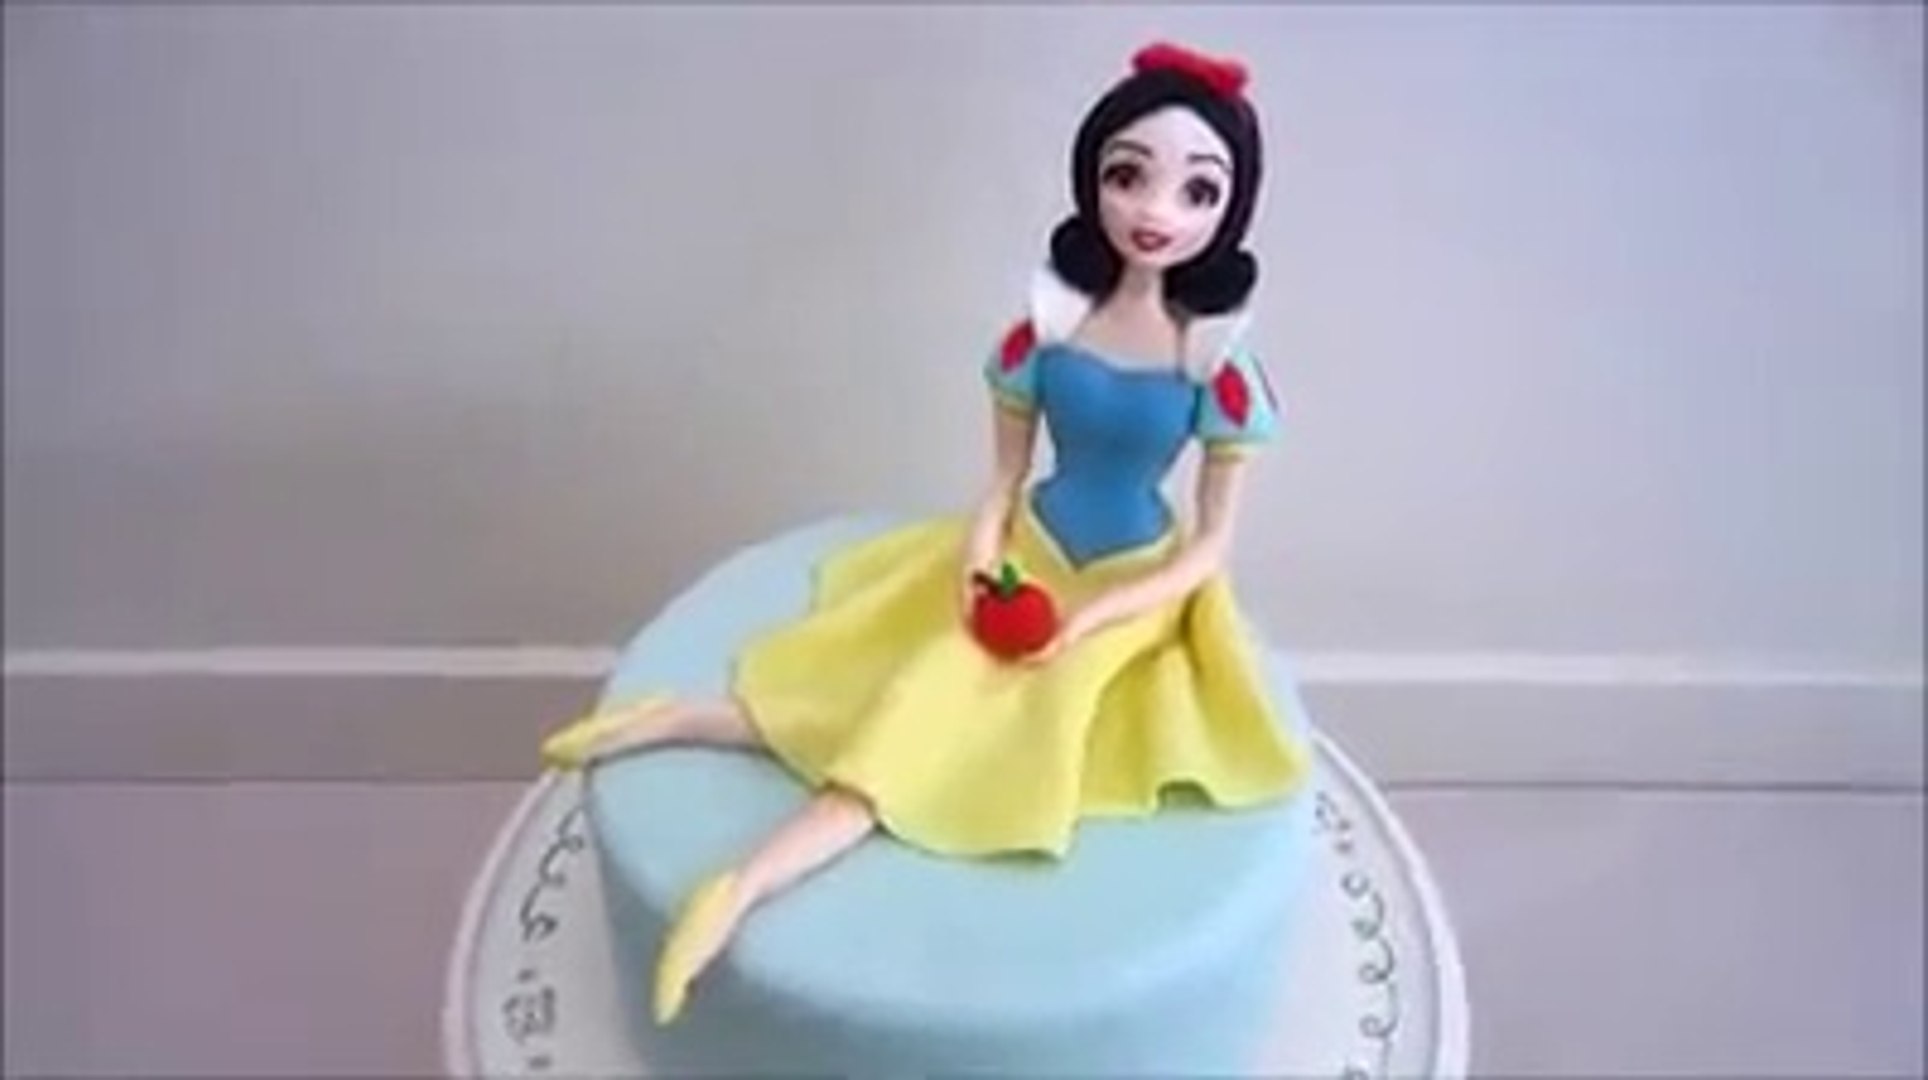 How to make Snow White princess with Play-Doh / step by step tutorial. 